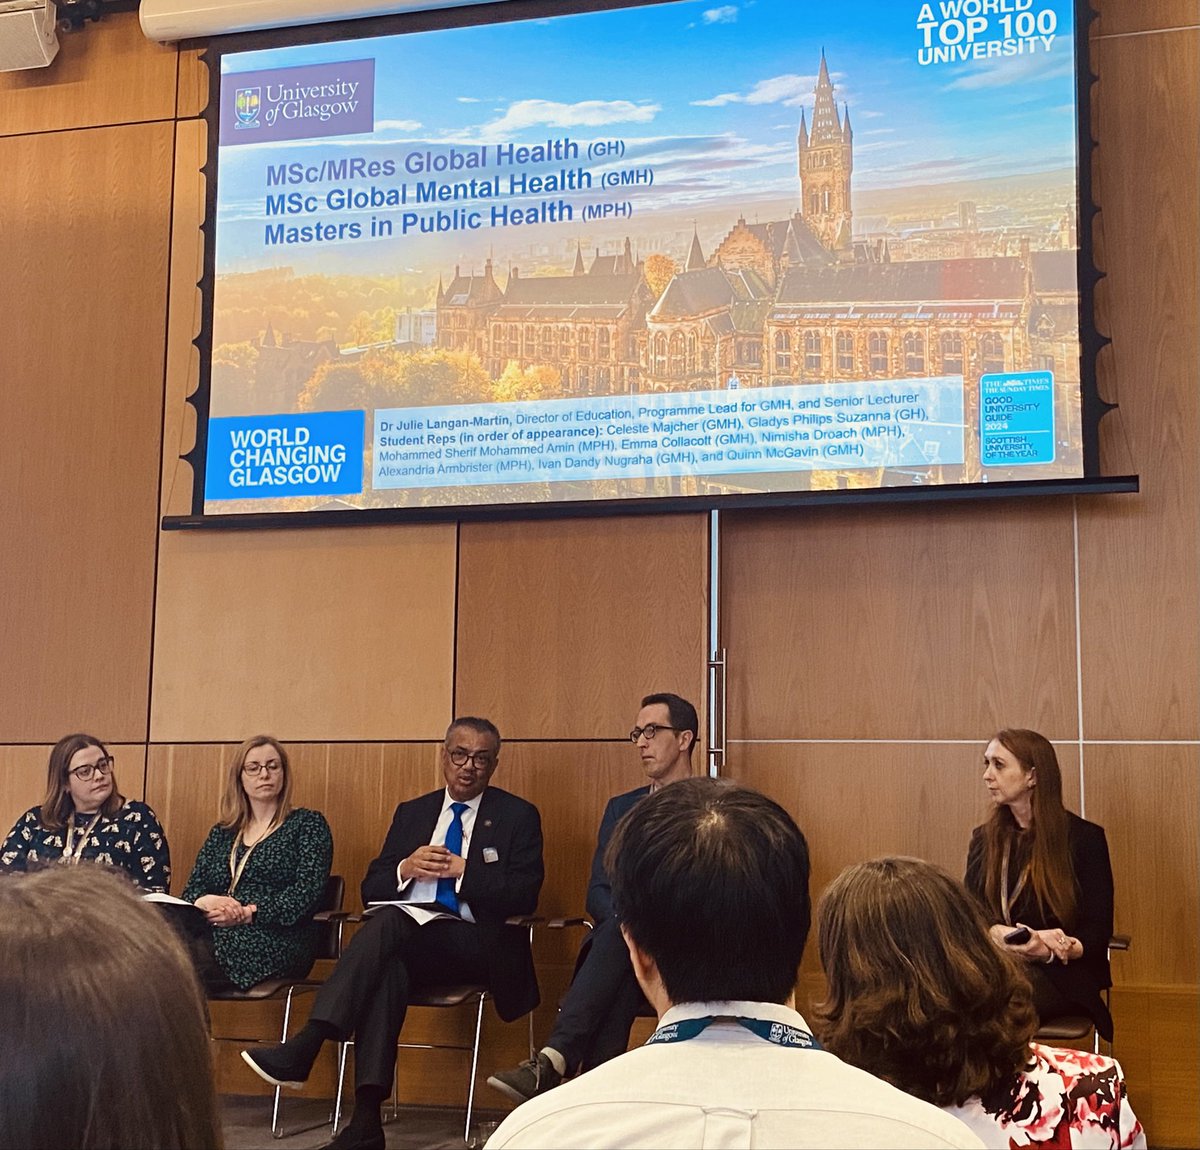 Real privilege to be in audience with @DrTedros @WHO showing and sharing his experience and genuine leadership for global health to our students @UofGMVLS @UofGlasgow